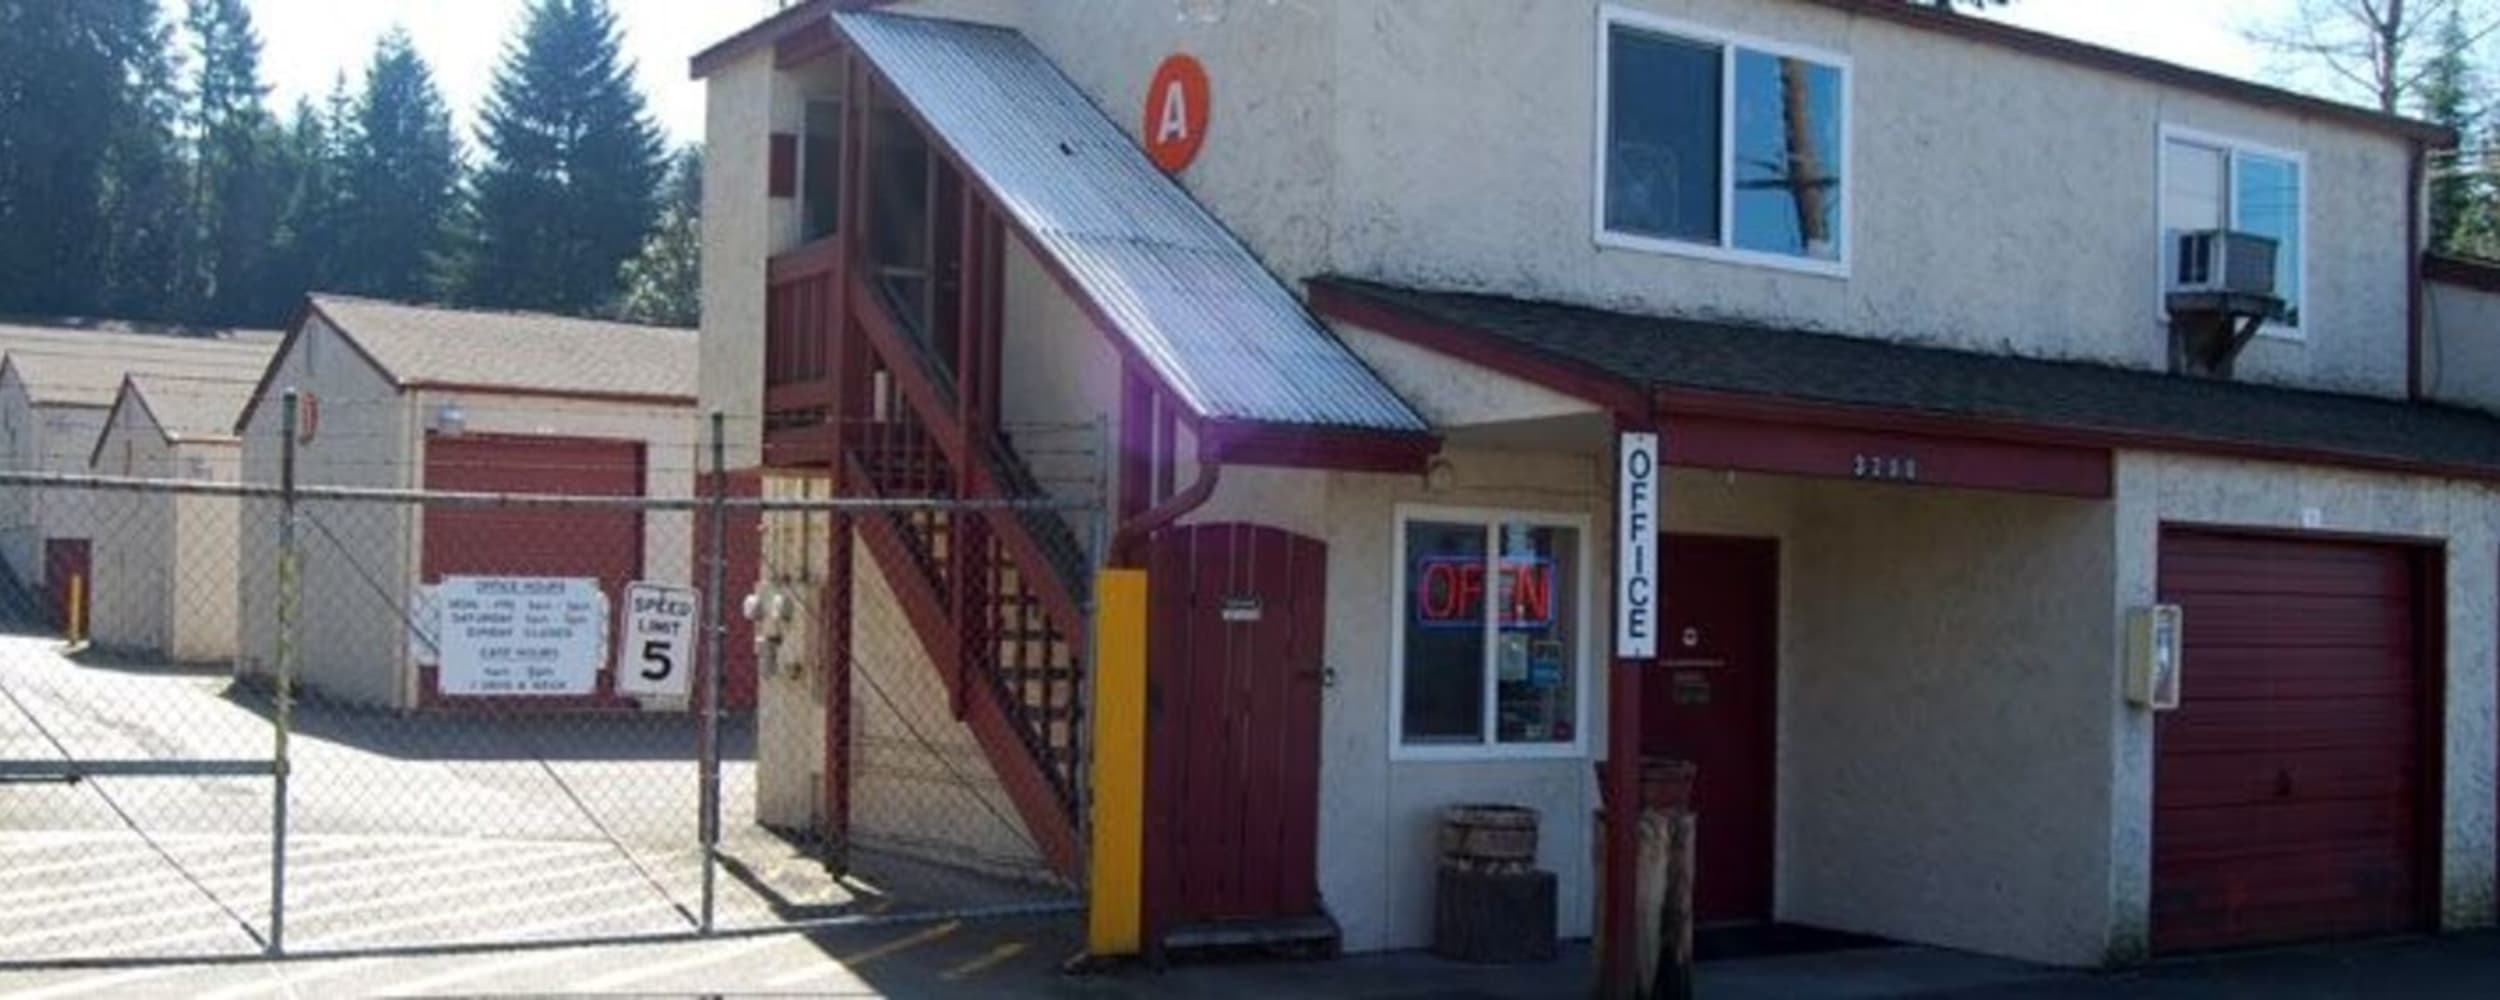 Leasing office at Space Station Self Storage in Port Orchard, Washington